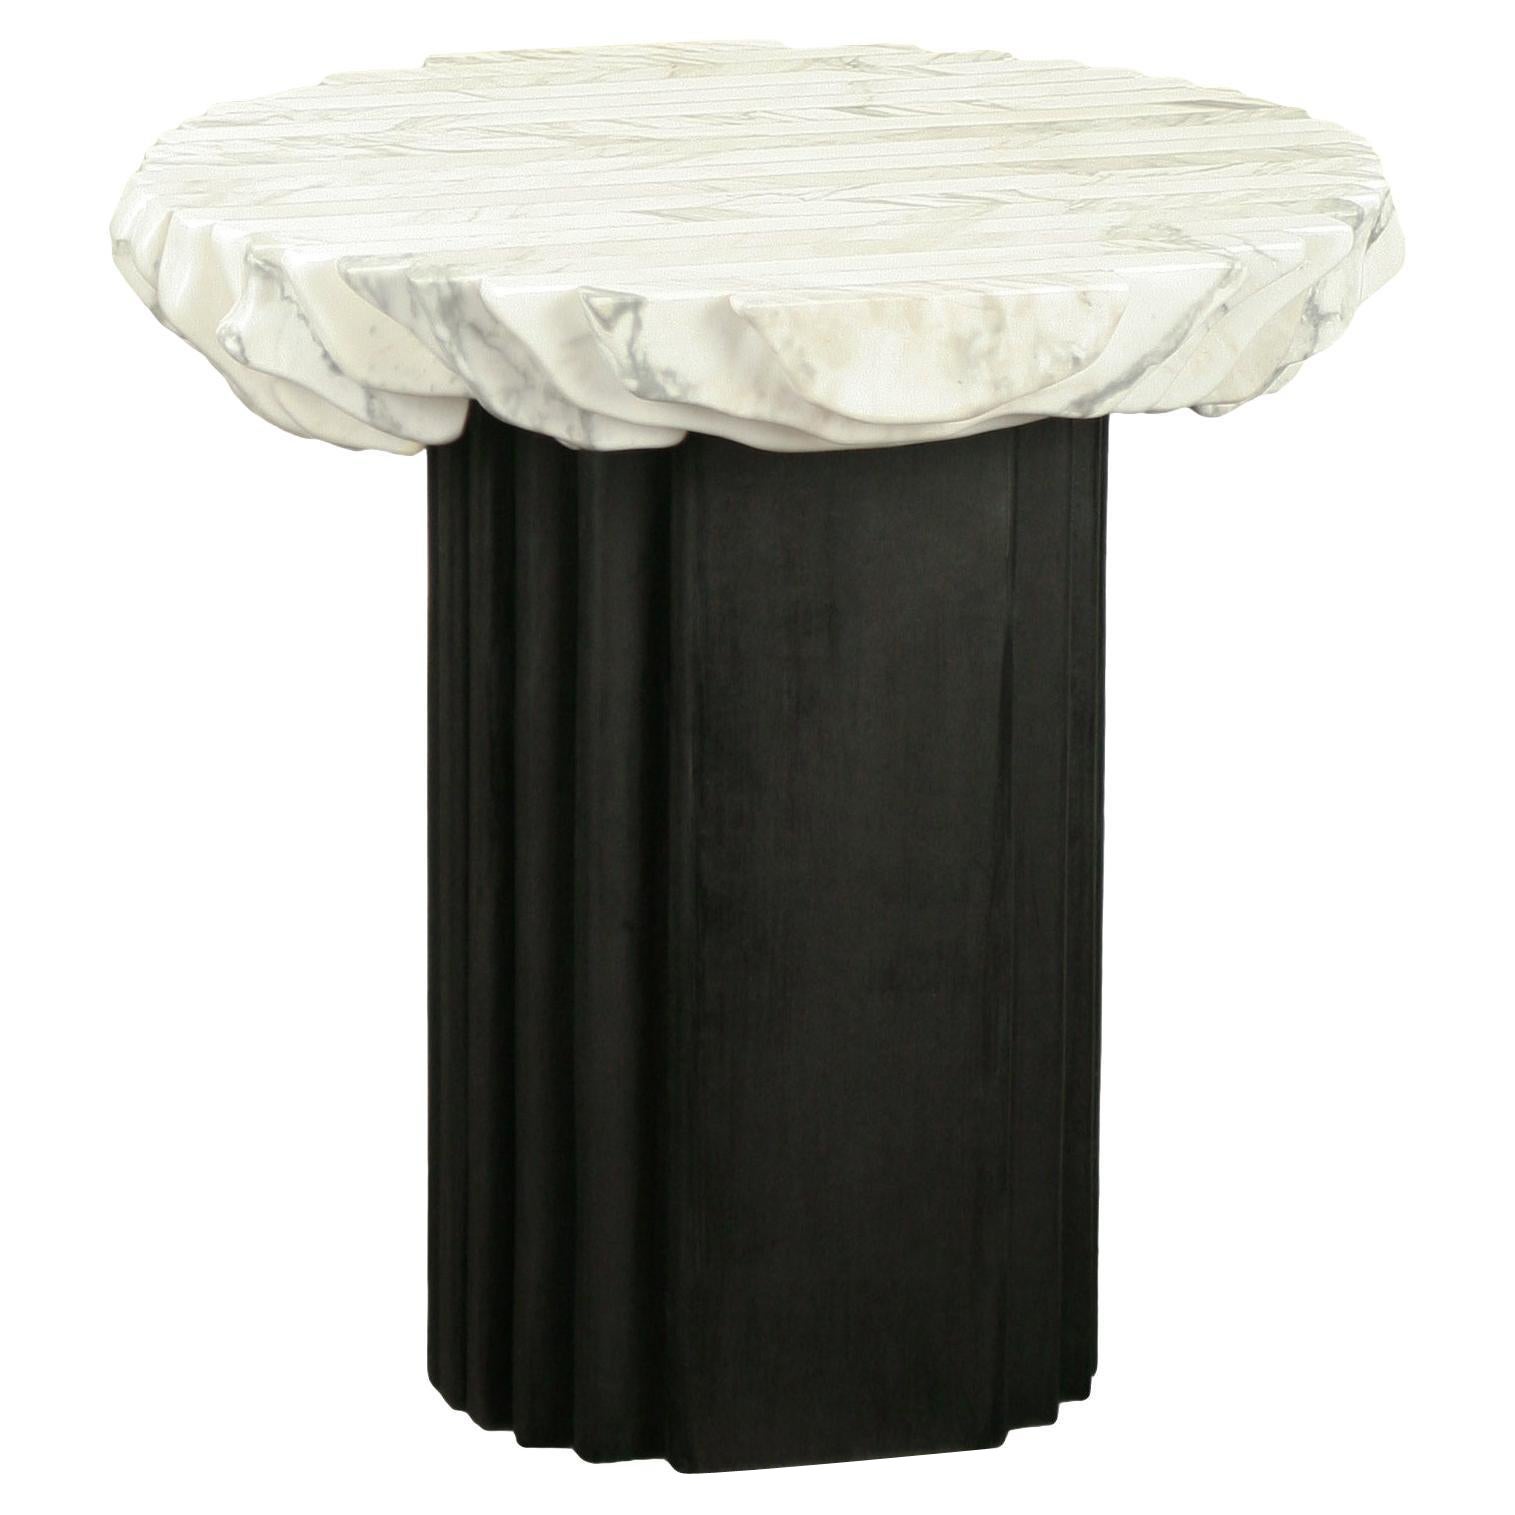 Edge Side Table by Krzywda For Sale